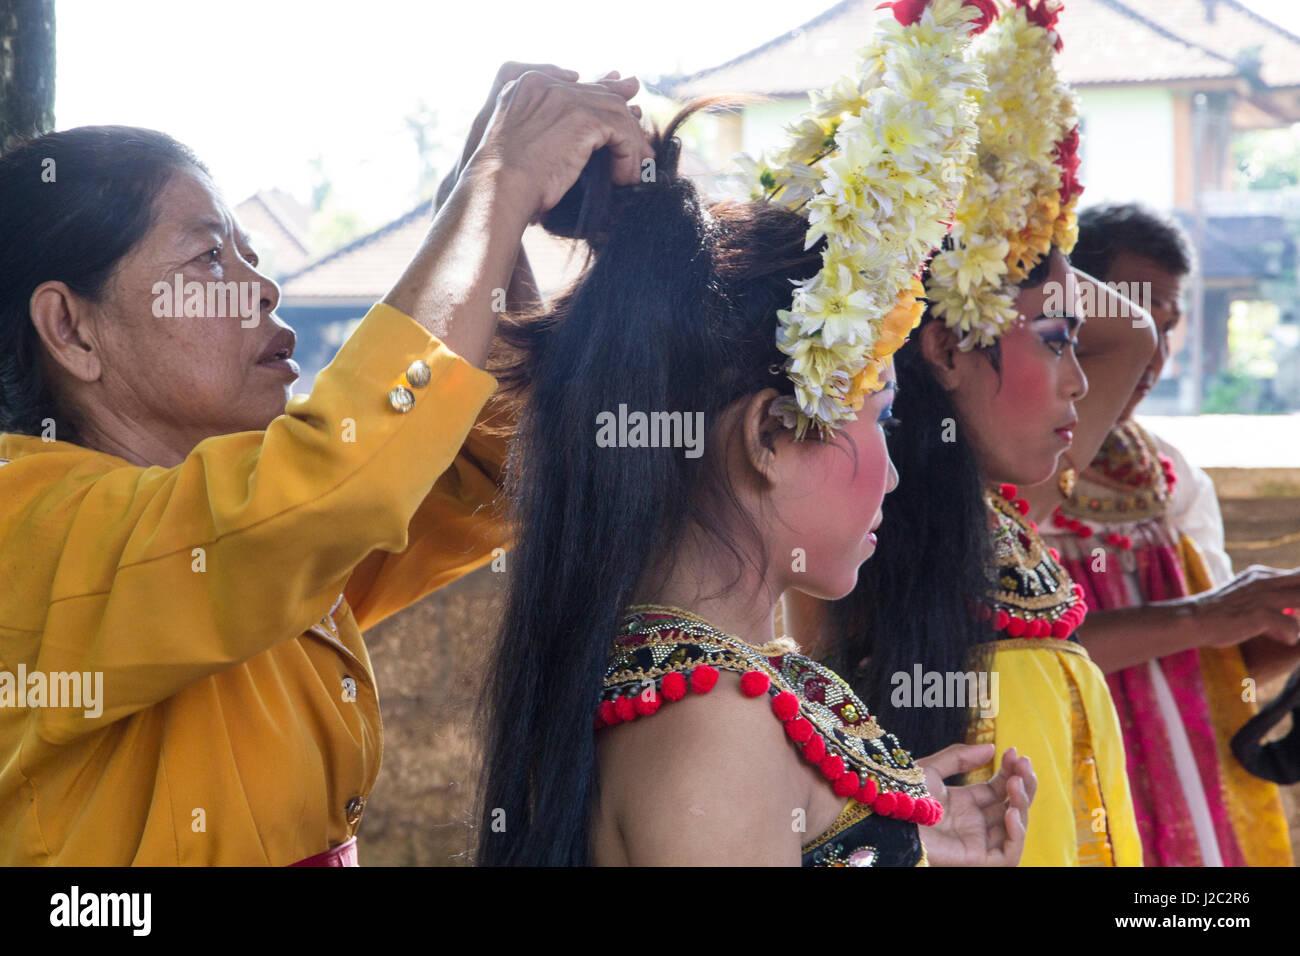 Indonesia, Bali. Female performers getting their hair styled with Frangipani flowers before the Legong Dance. (Editorial Use Only) Stock Photo